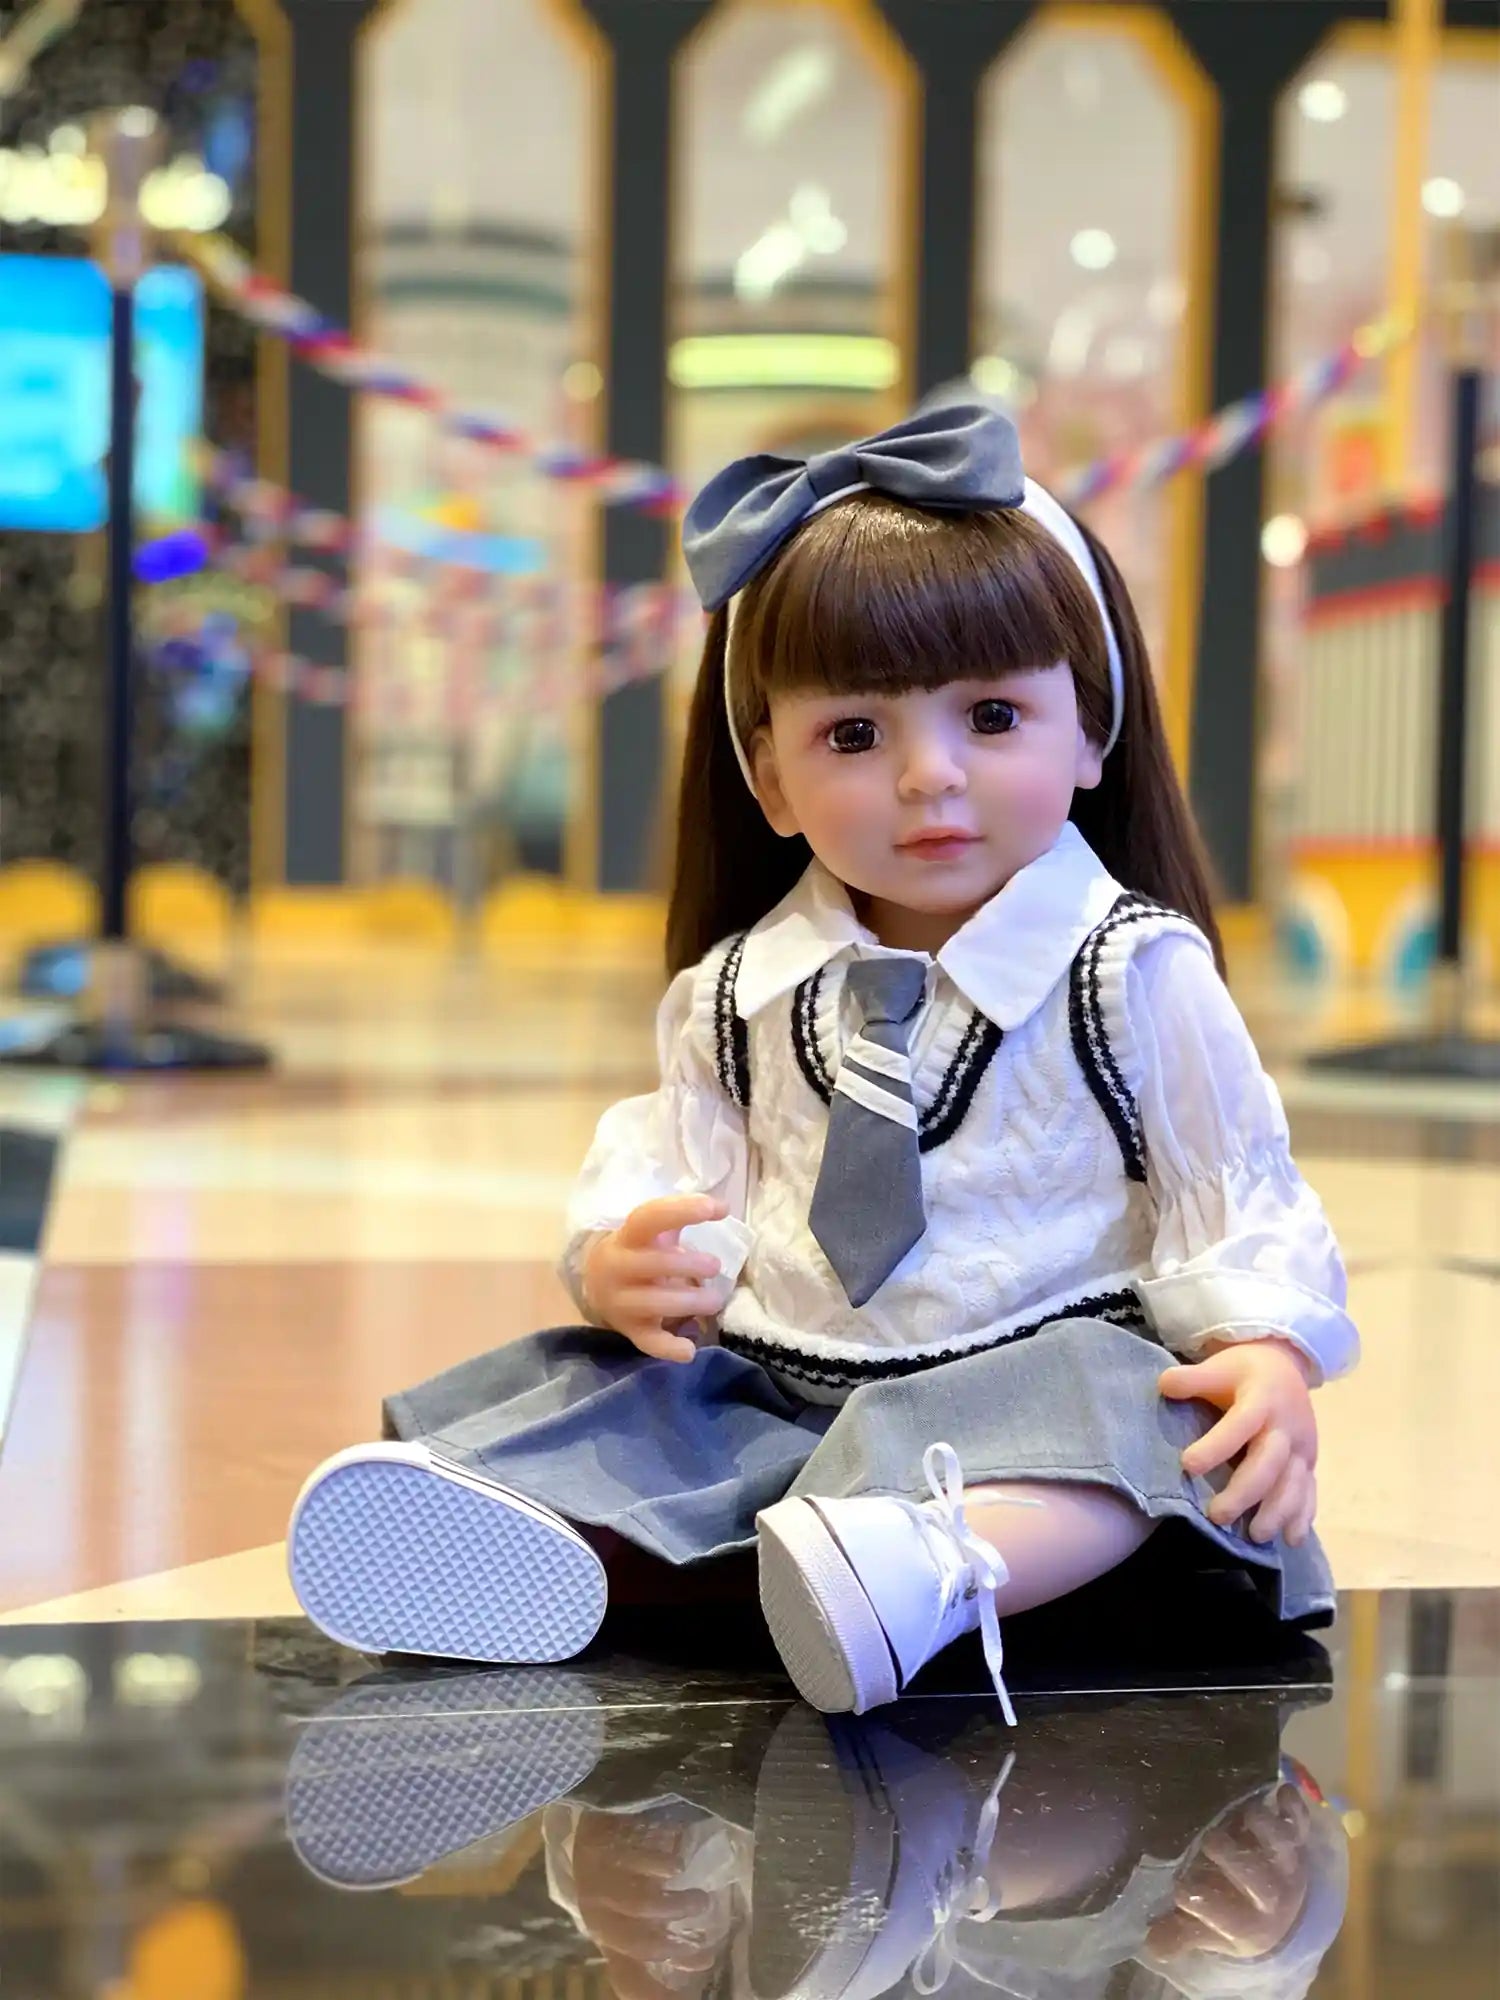 Artisan-crafted doll capturing a schoolgirl’s look, featuring glossy brown hair with bangs and a large grey bow, sitting against a playful, colorful background.